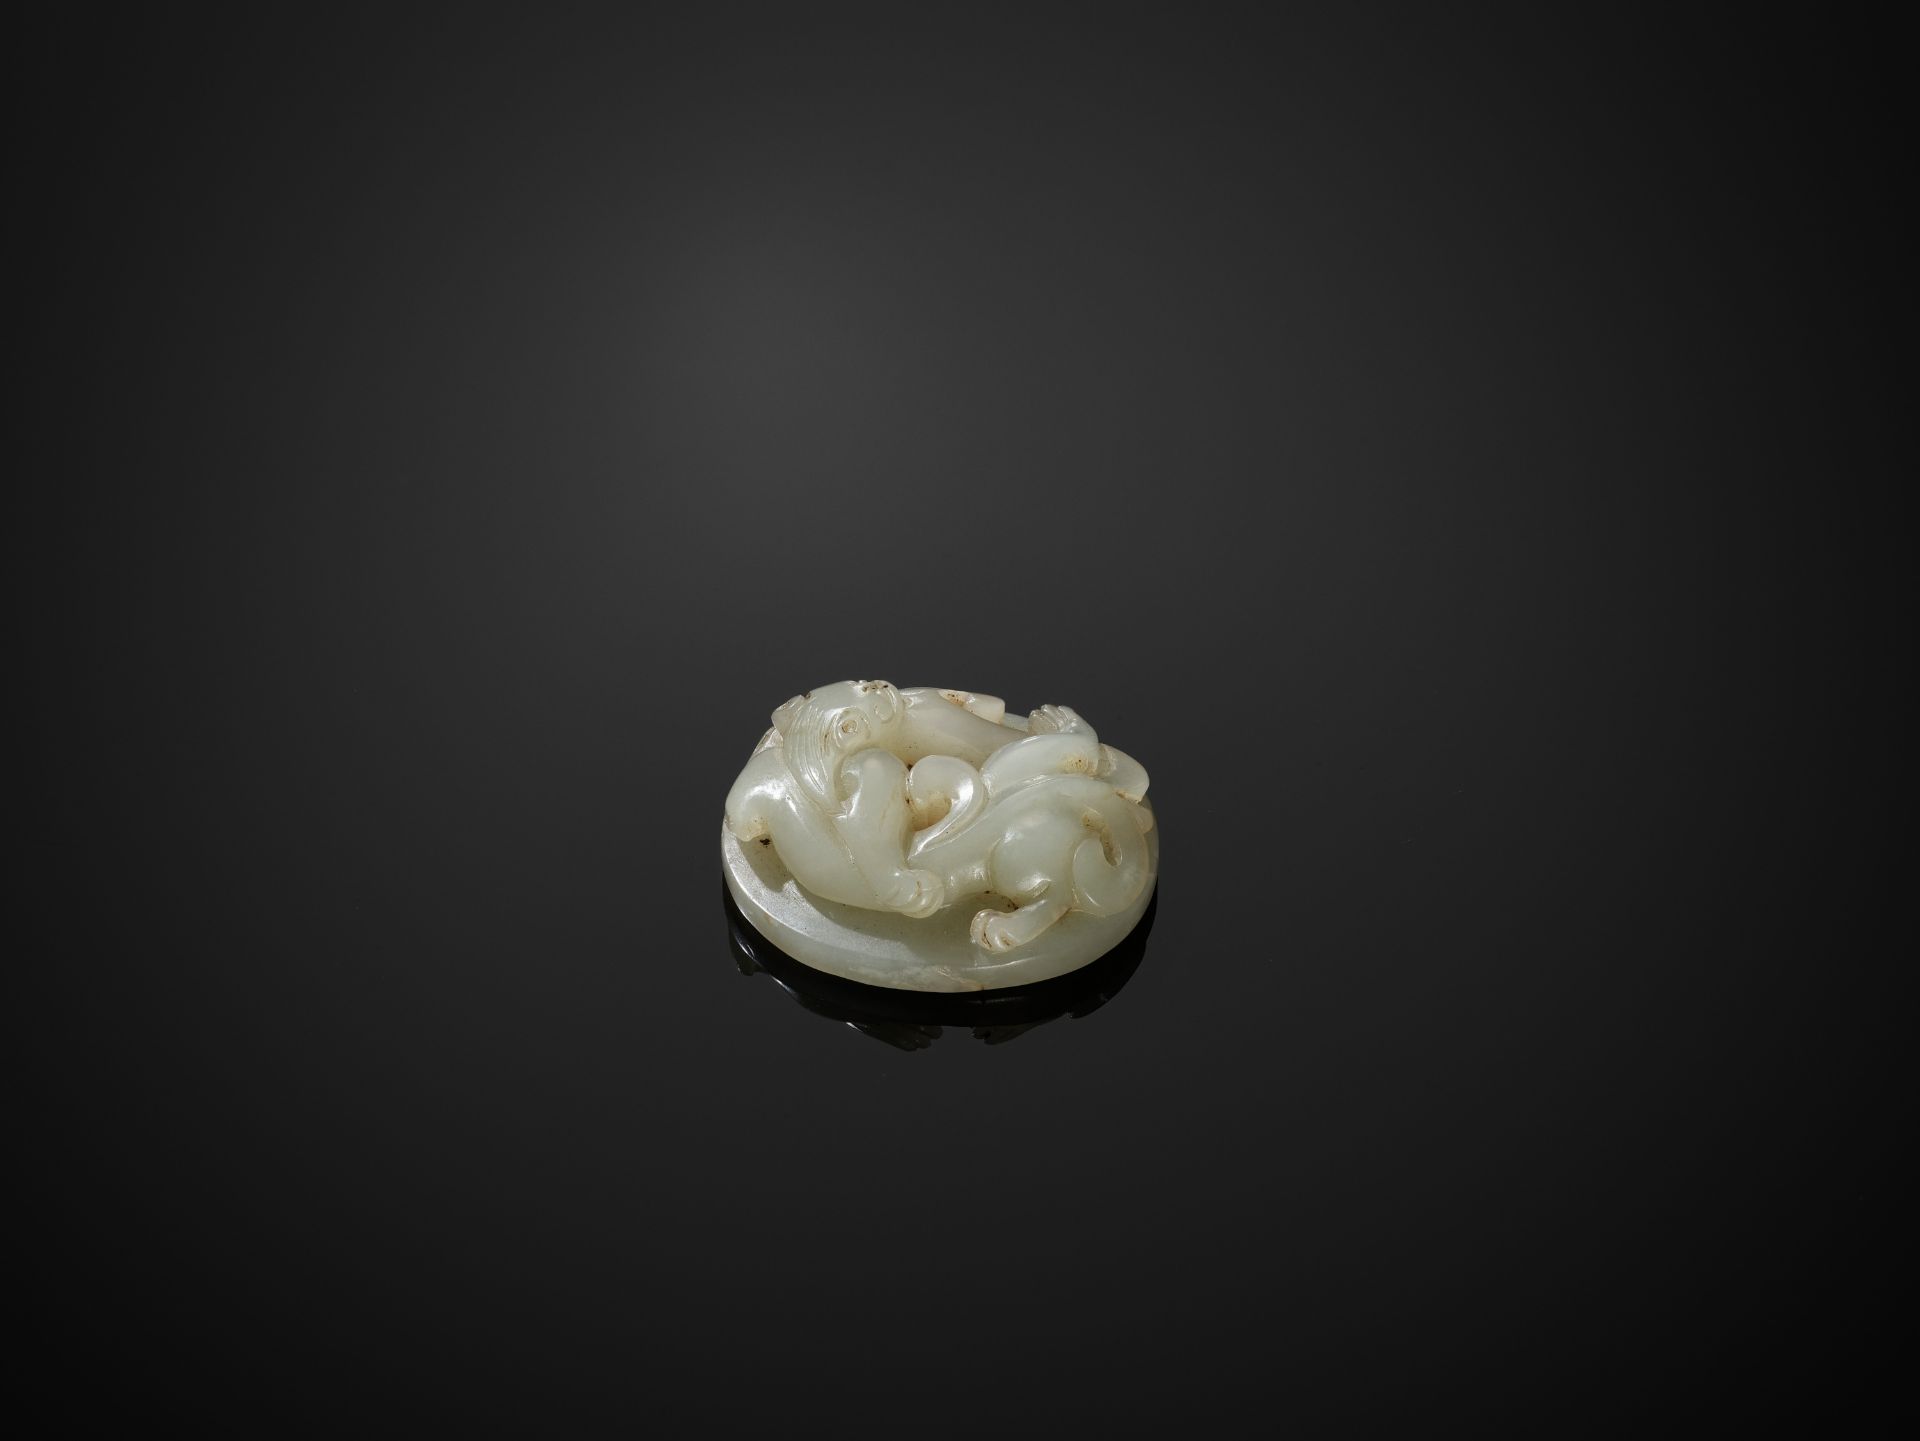 AN EXQUISITE SMALL PALE CELADON JADE SWORD POMMEL WITH HORNLESS DRAGON, WESTERN HAN - Image 3 of 6